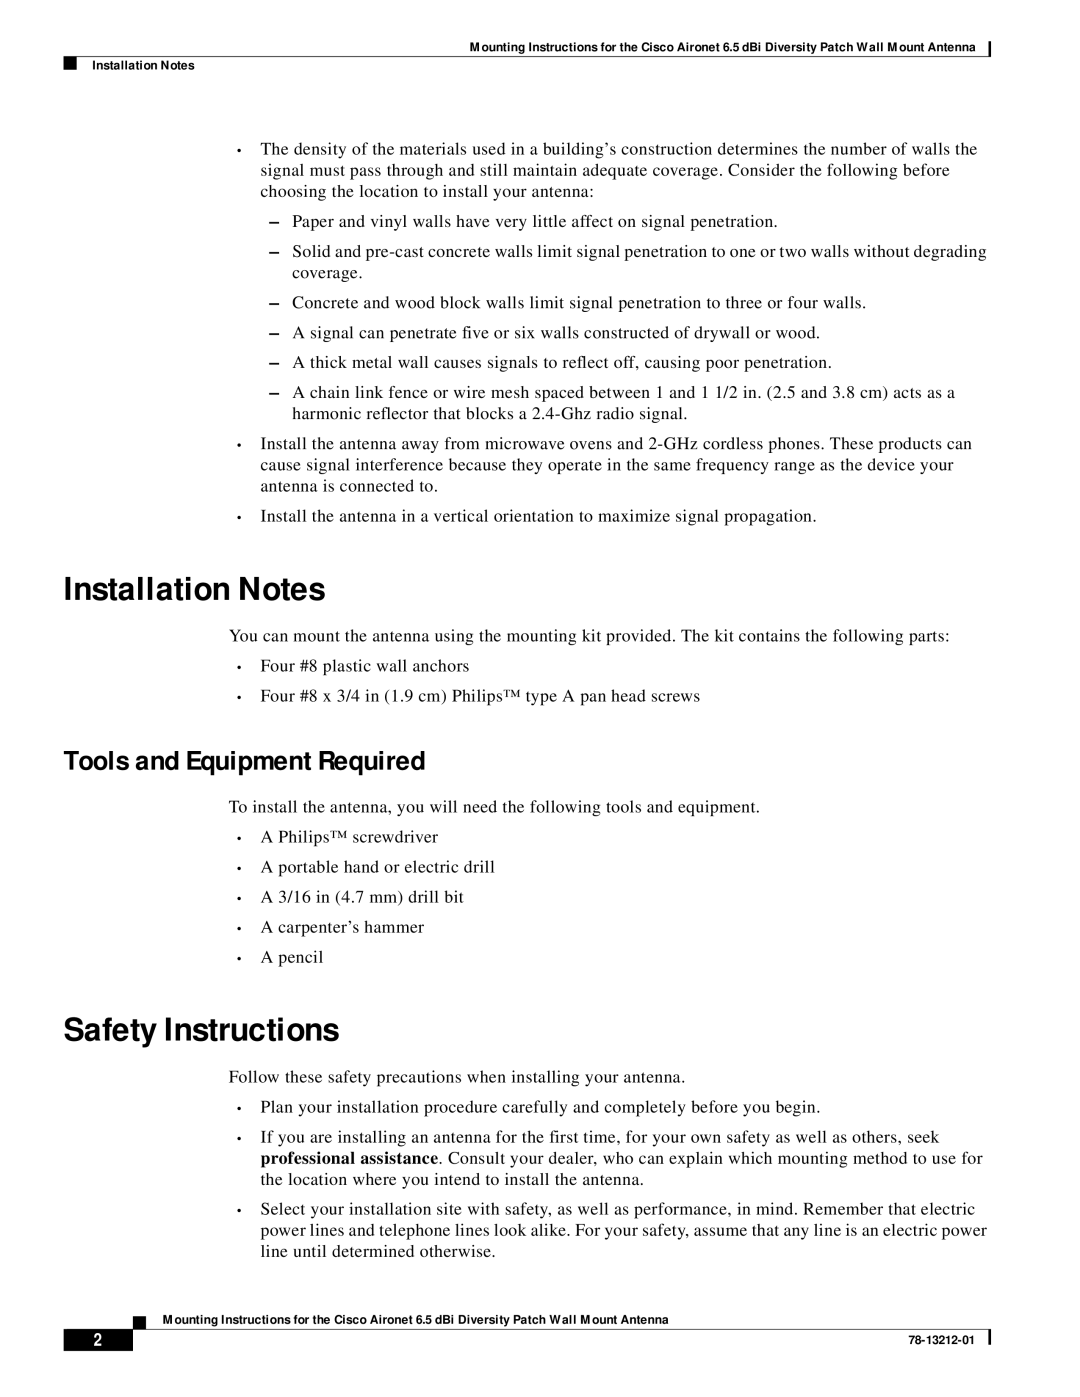 Cisco Systems 78-13212-01 installation instructions Installation Notes, Safety Instructions, Tools and Equipment Required 